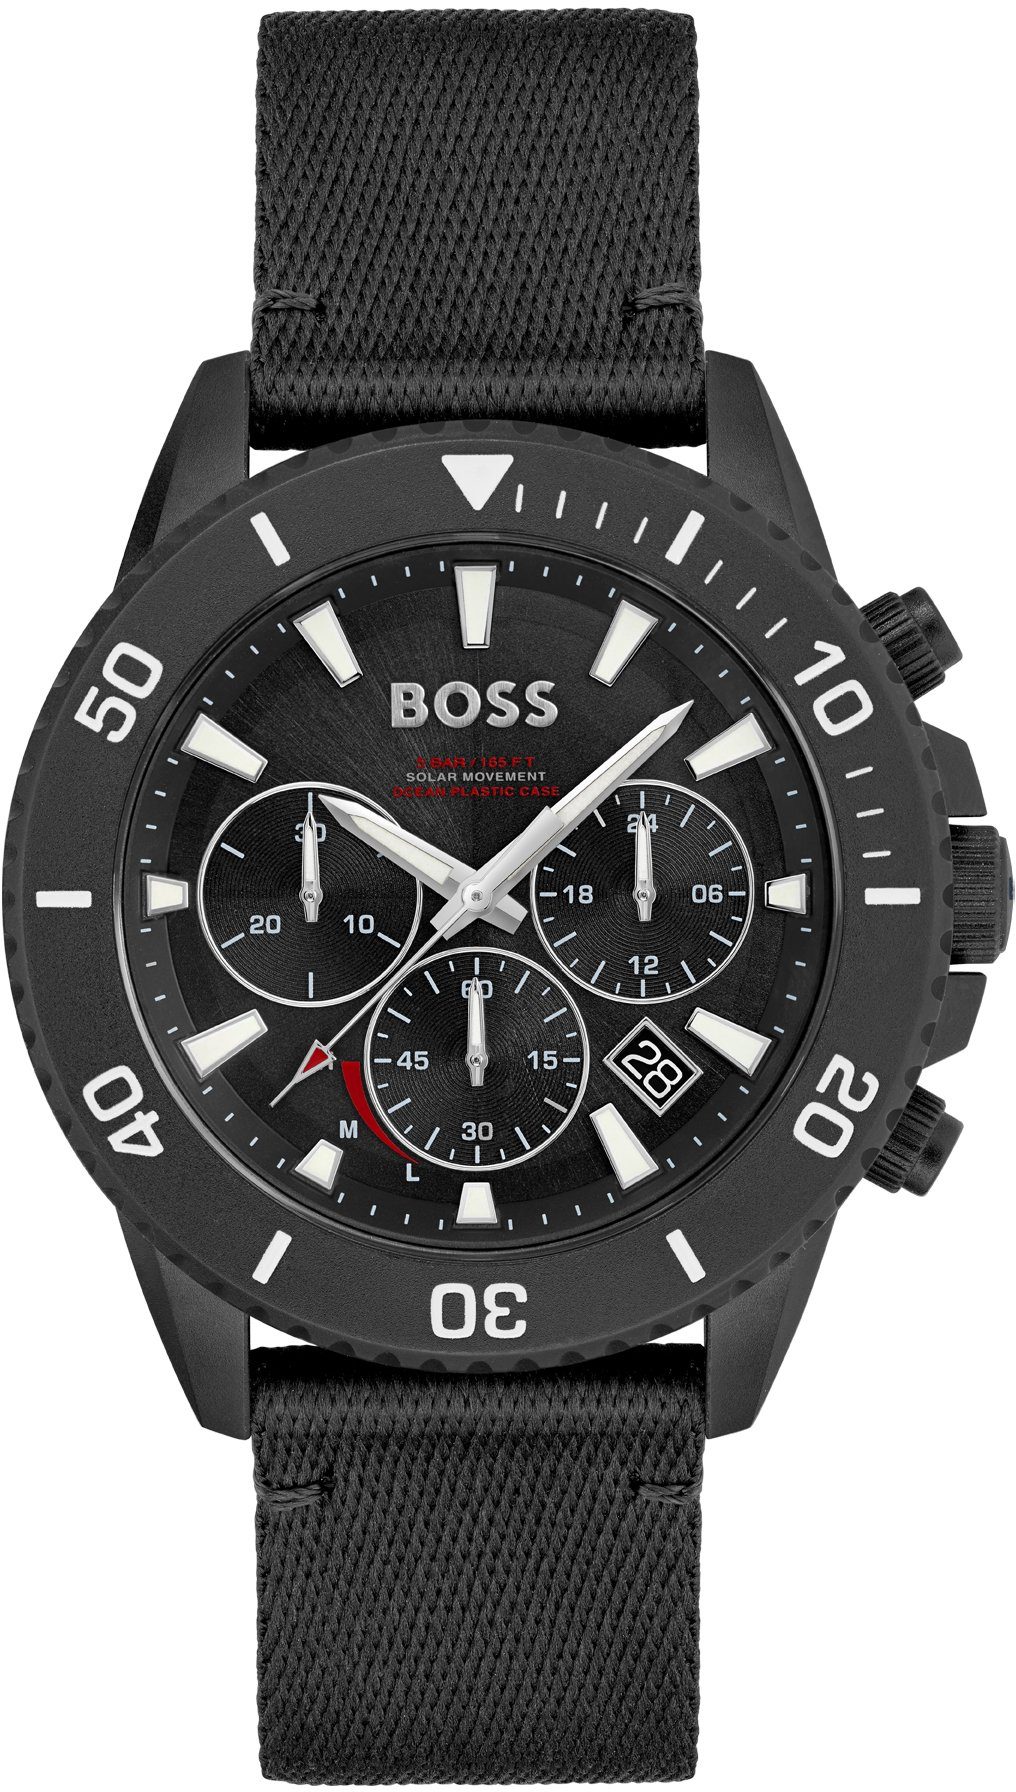 BOSS Admiral 1513918 #tide, Sustainable Chronograph